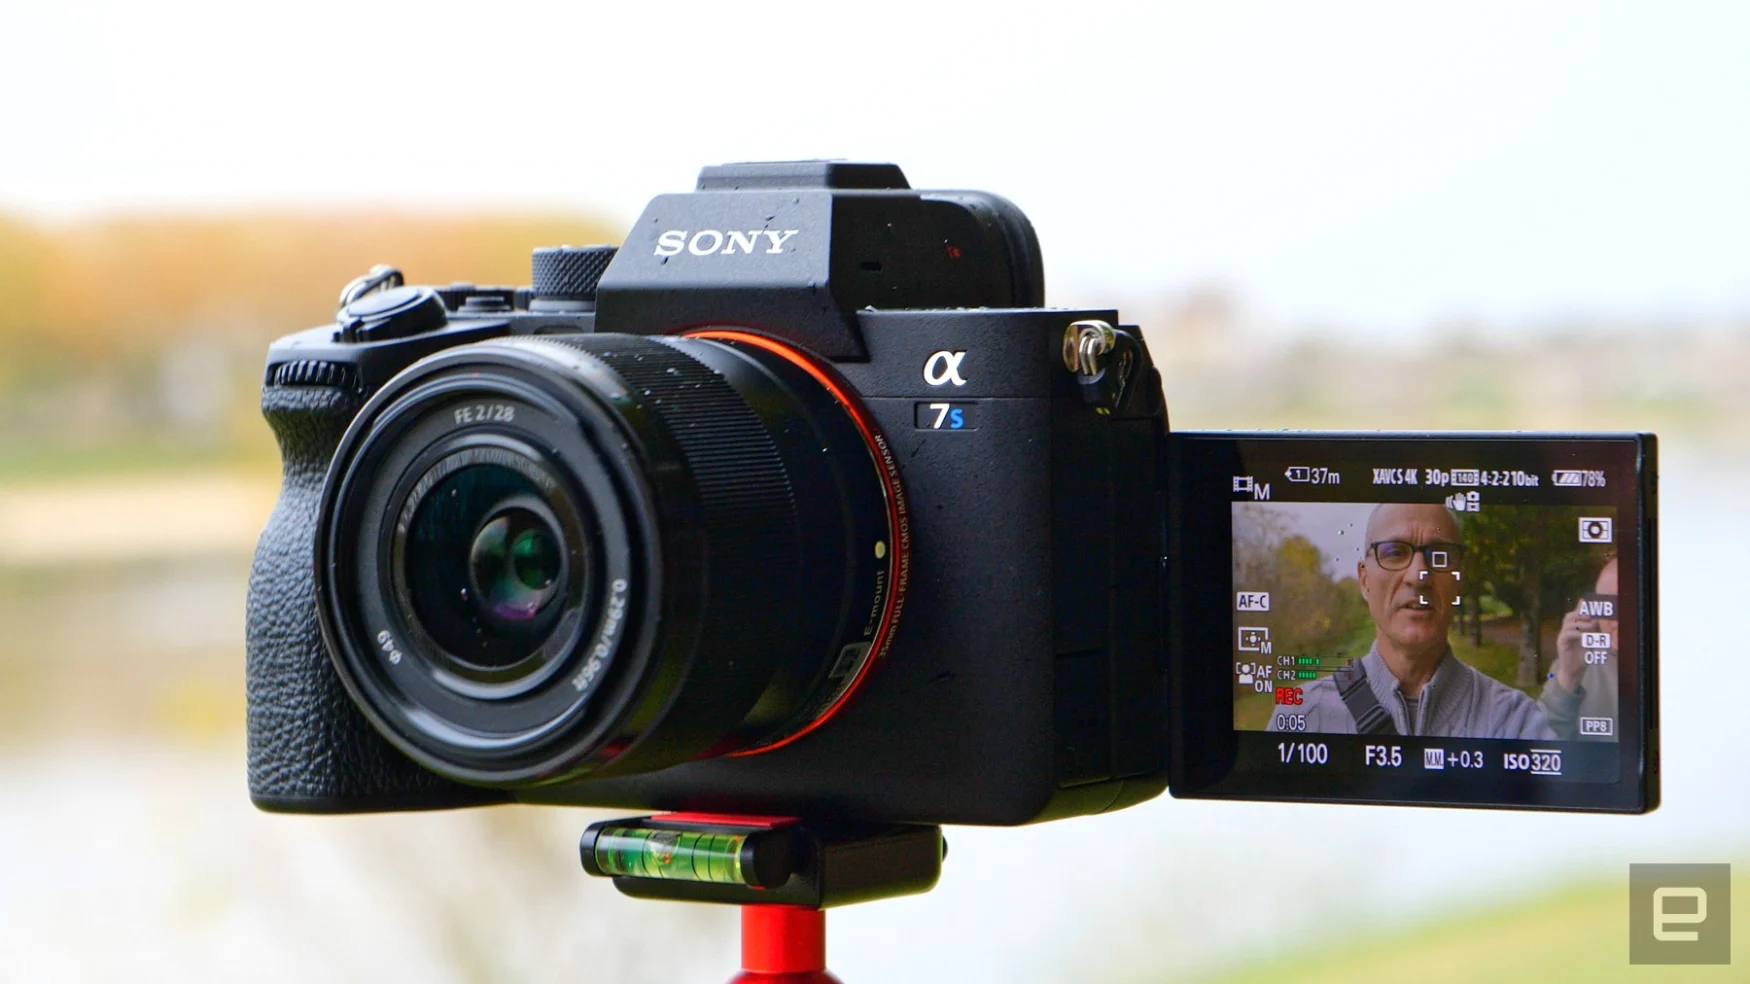 Sony A7S III full-frame mirrorless camera review